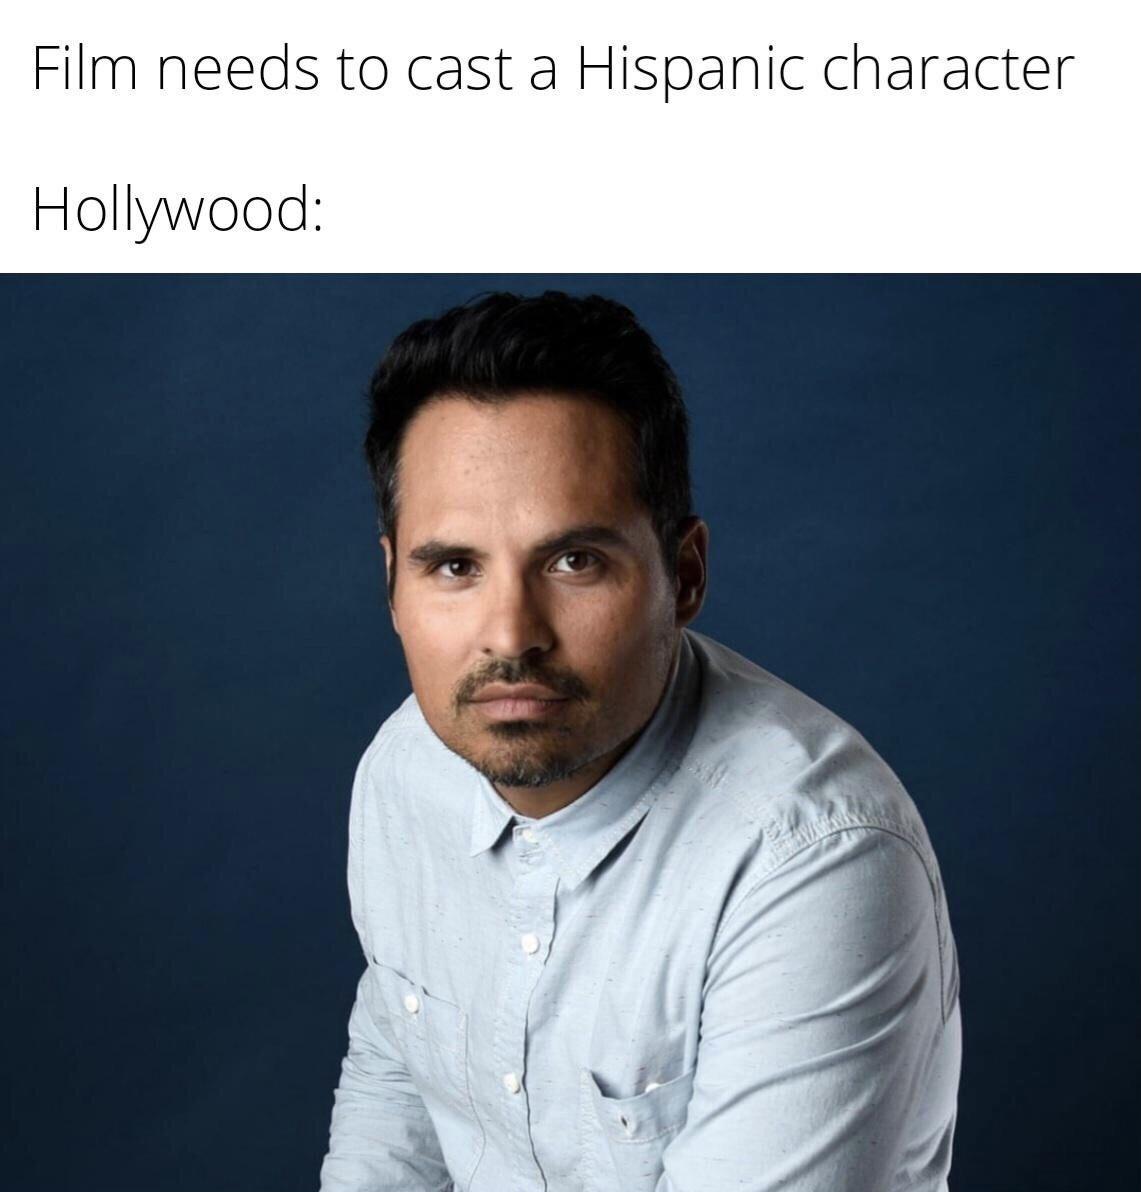 michael pena - Film needs to cast a Hispanic character Hollywood